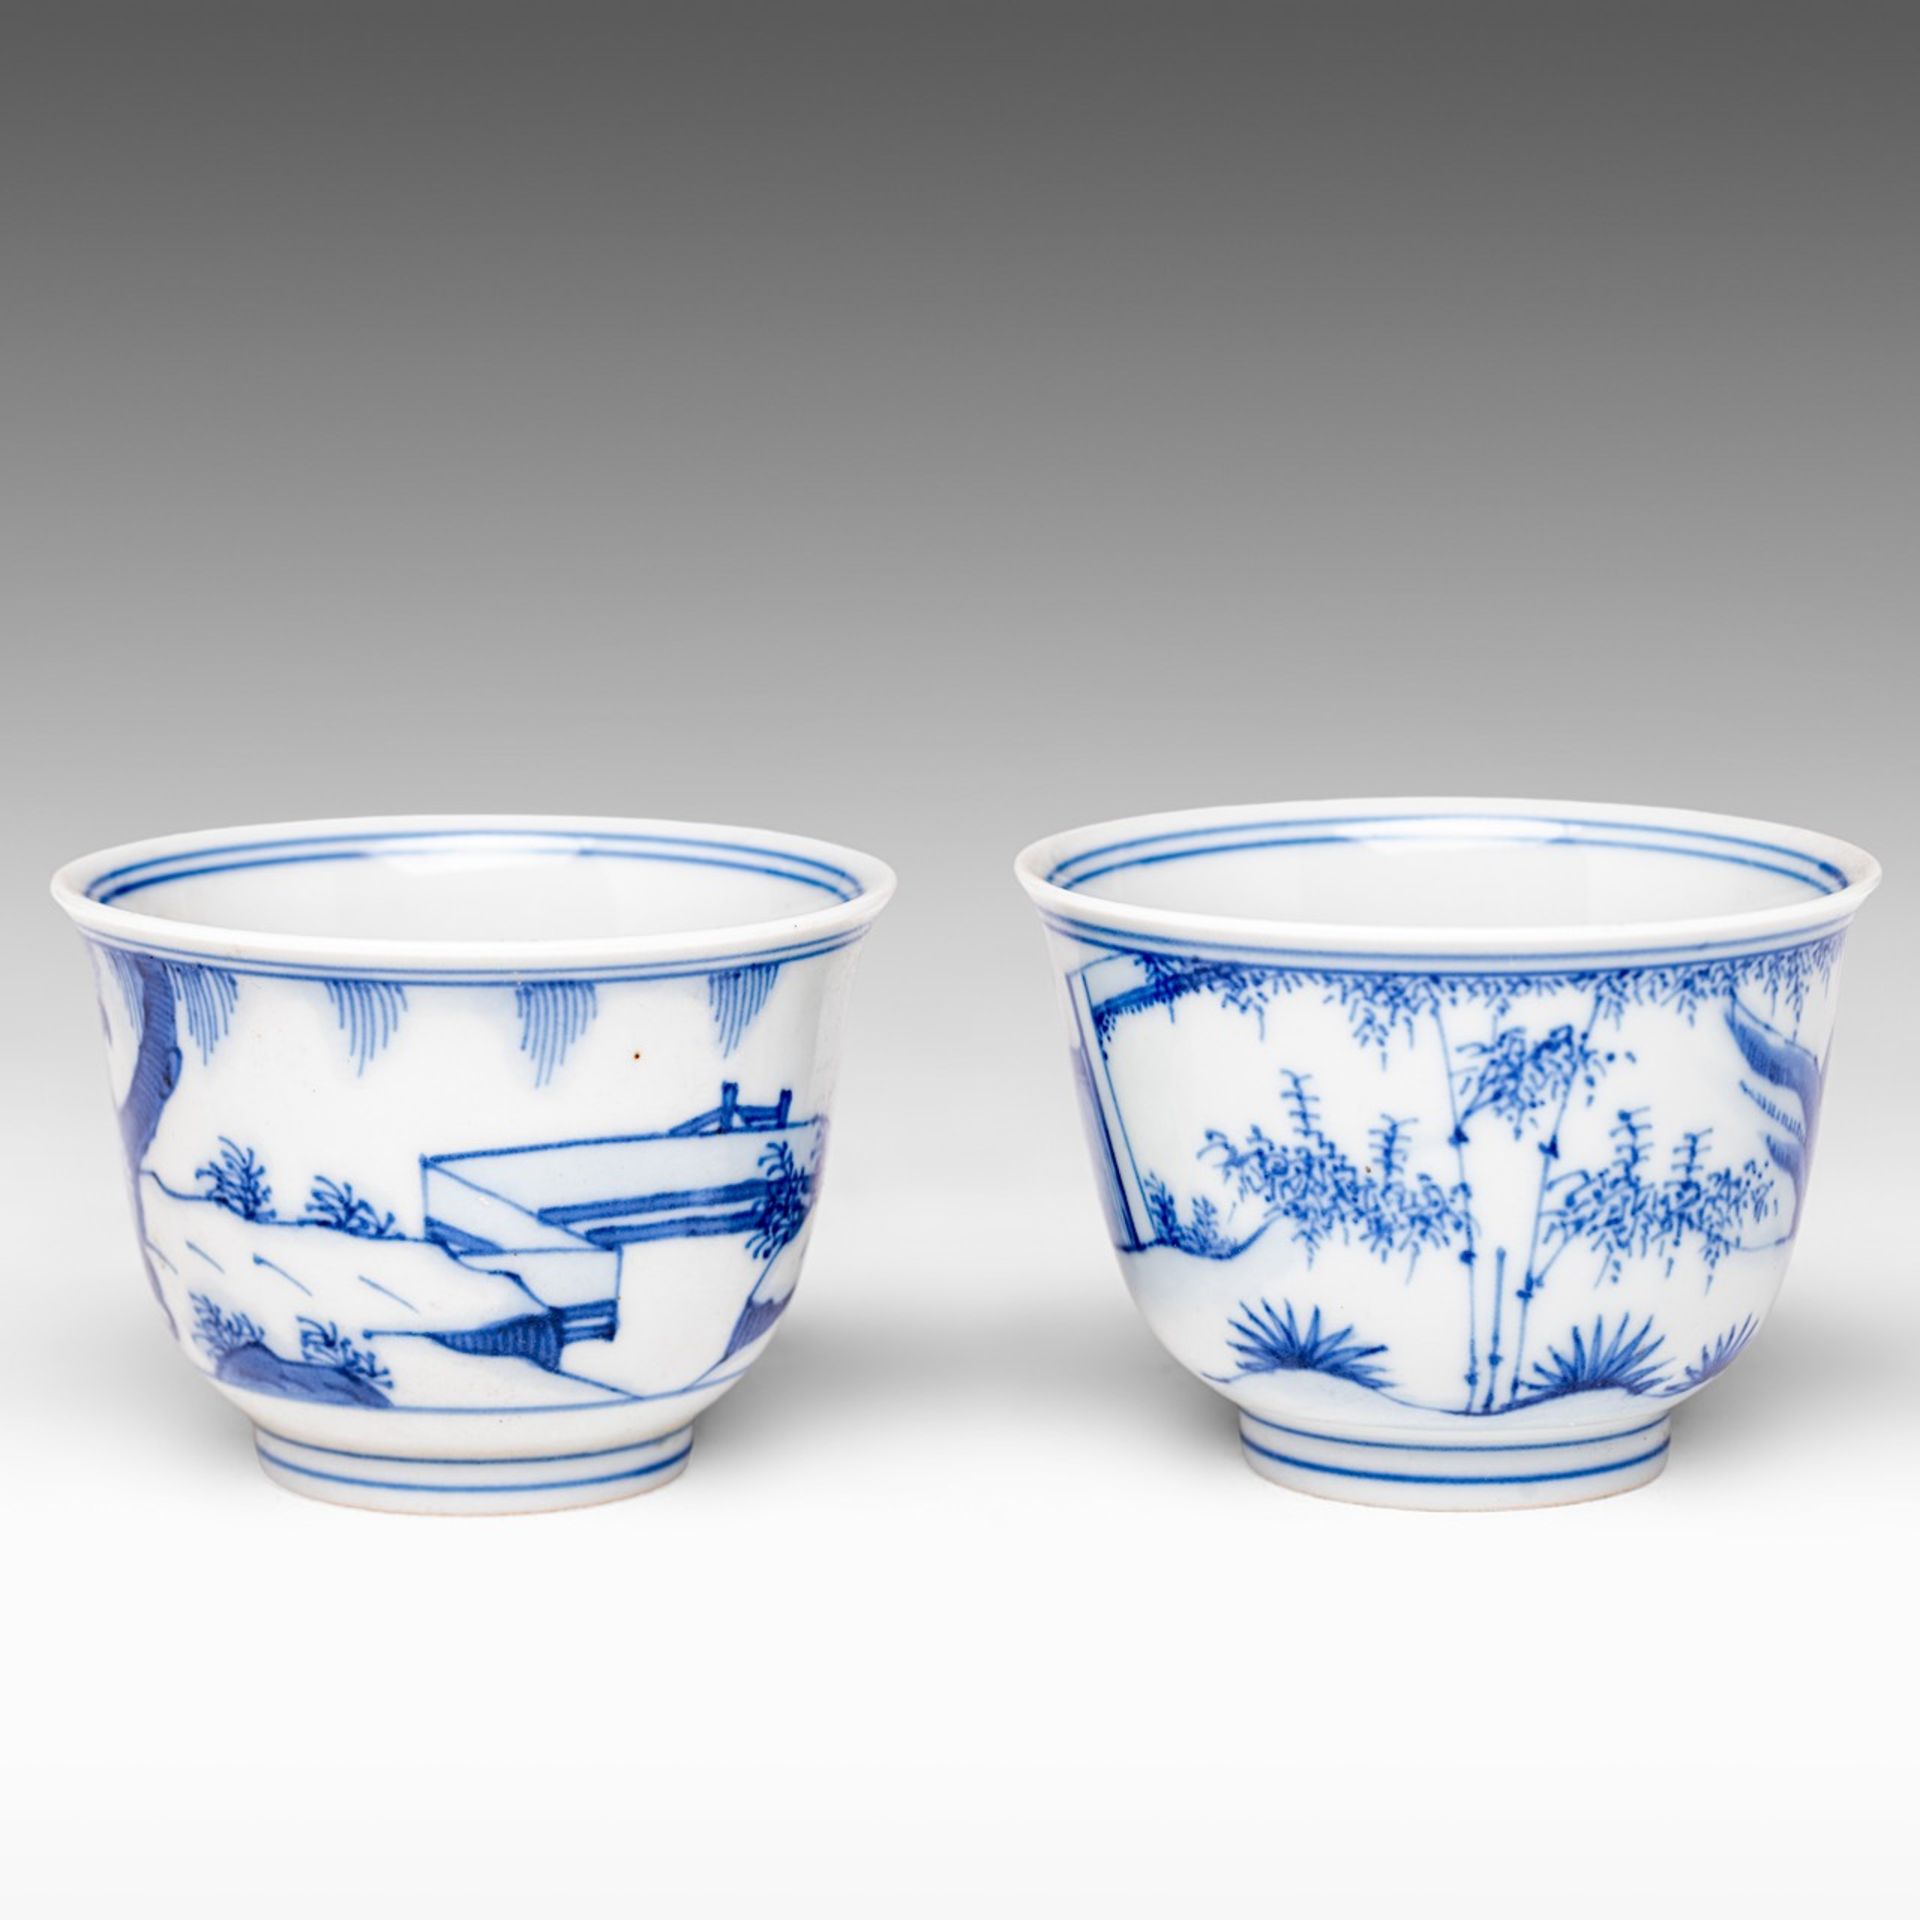 Two Chinese Kangxi style blue and white 'Figural' tea cups, H 6 - dia 8,2 cm - Image 3 of 6